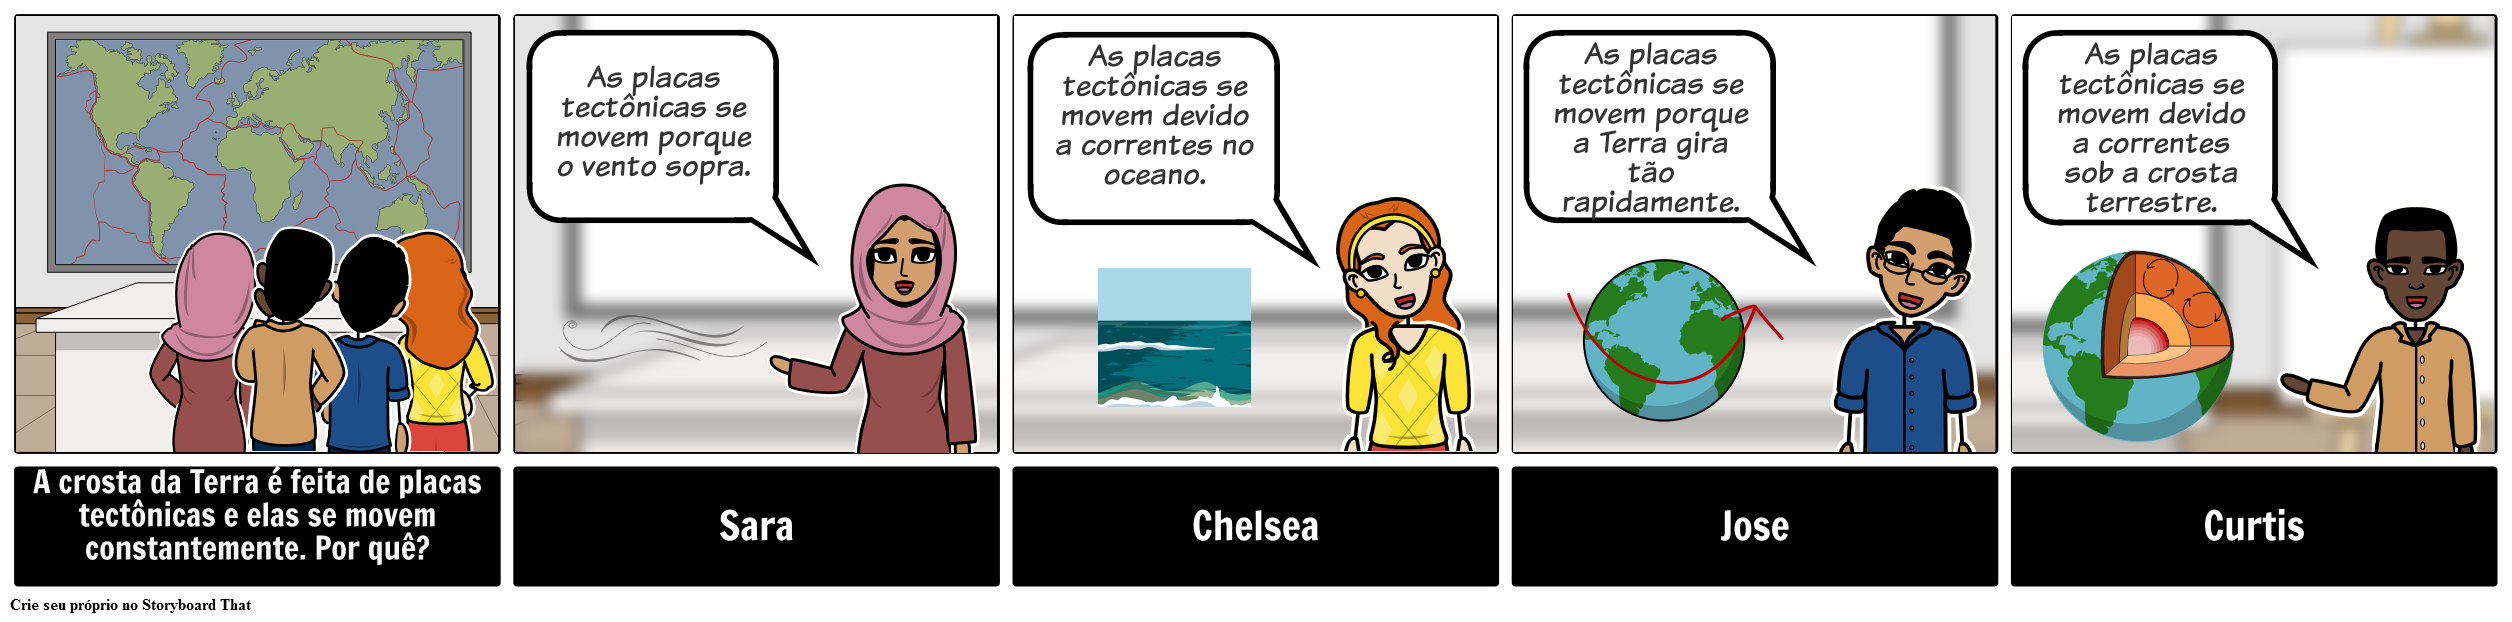 Discussão Storyboard - HS - Tectonic Plates